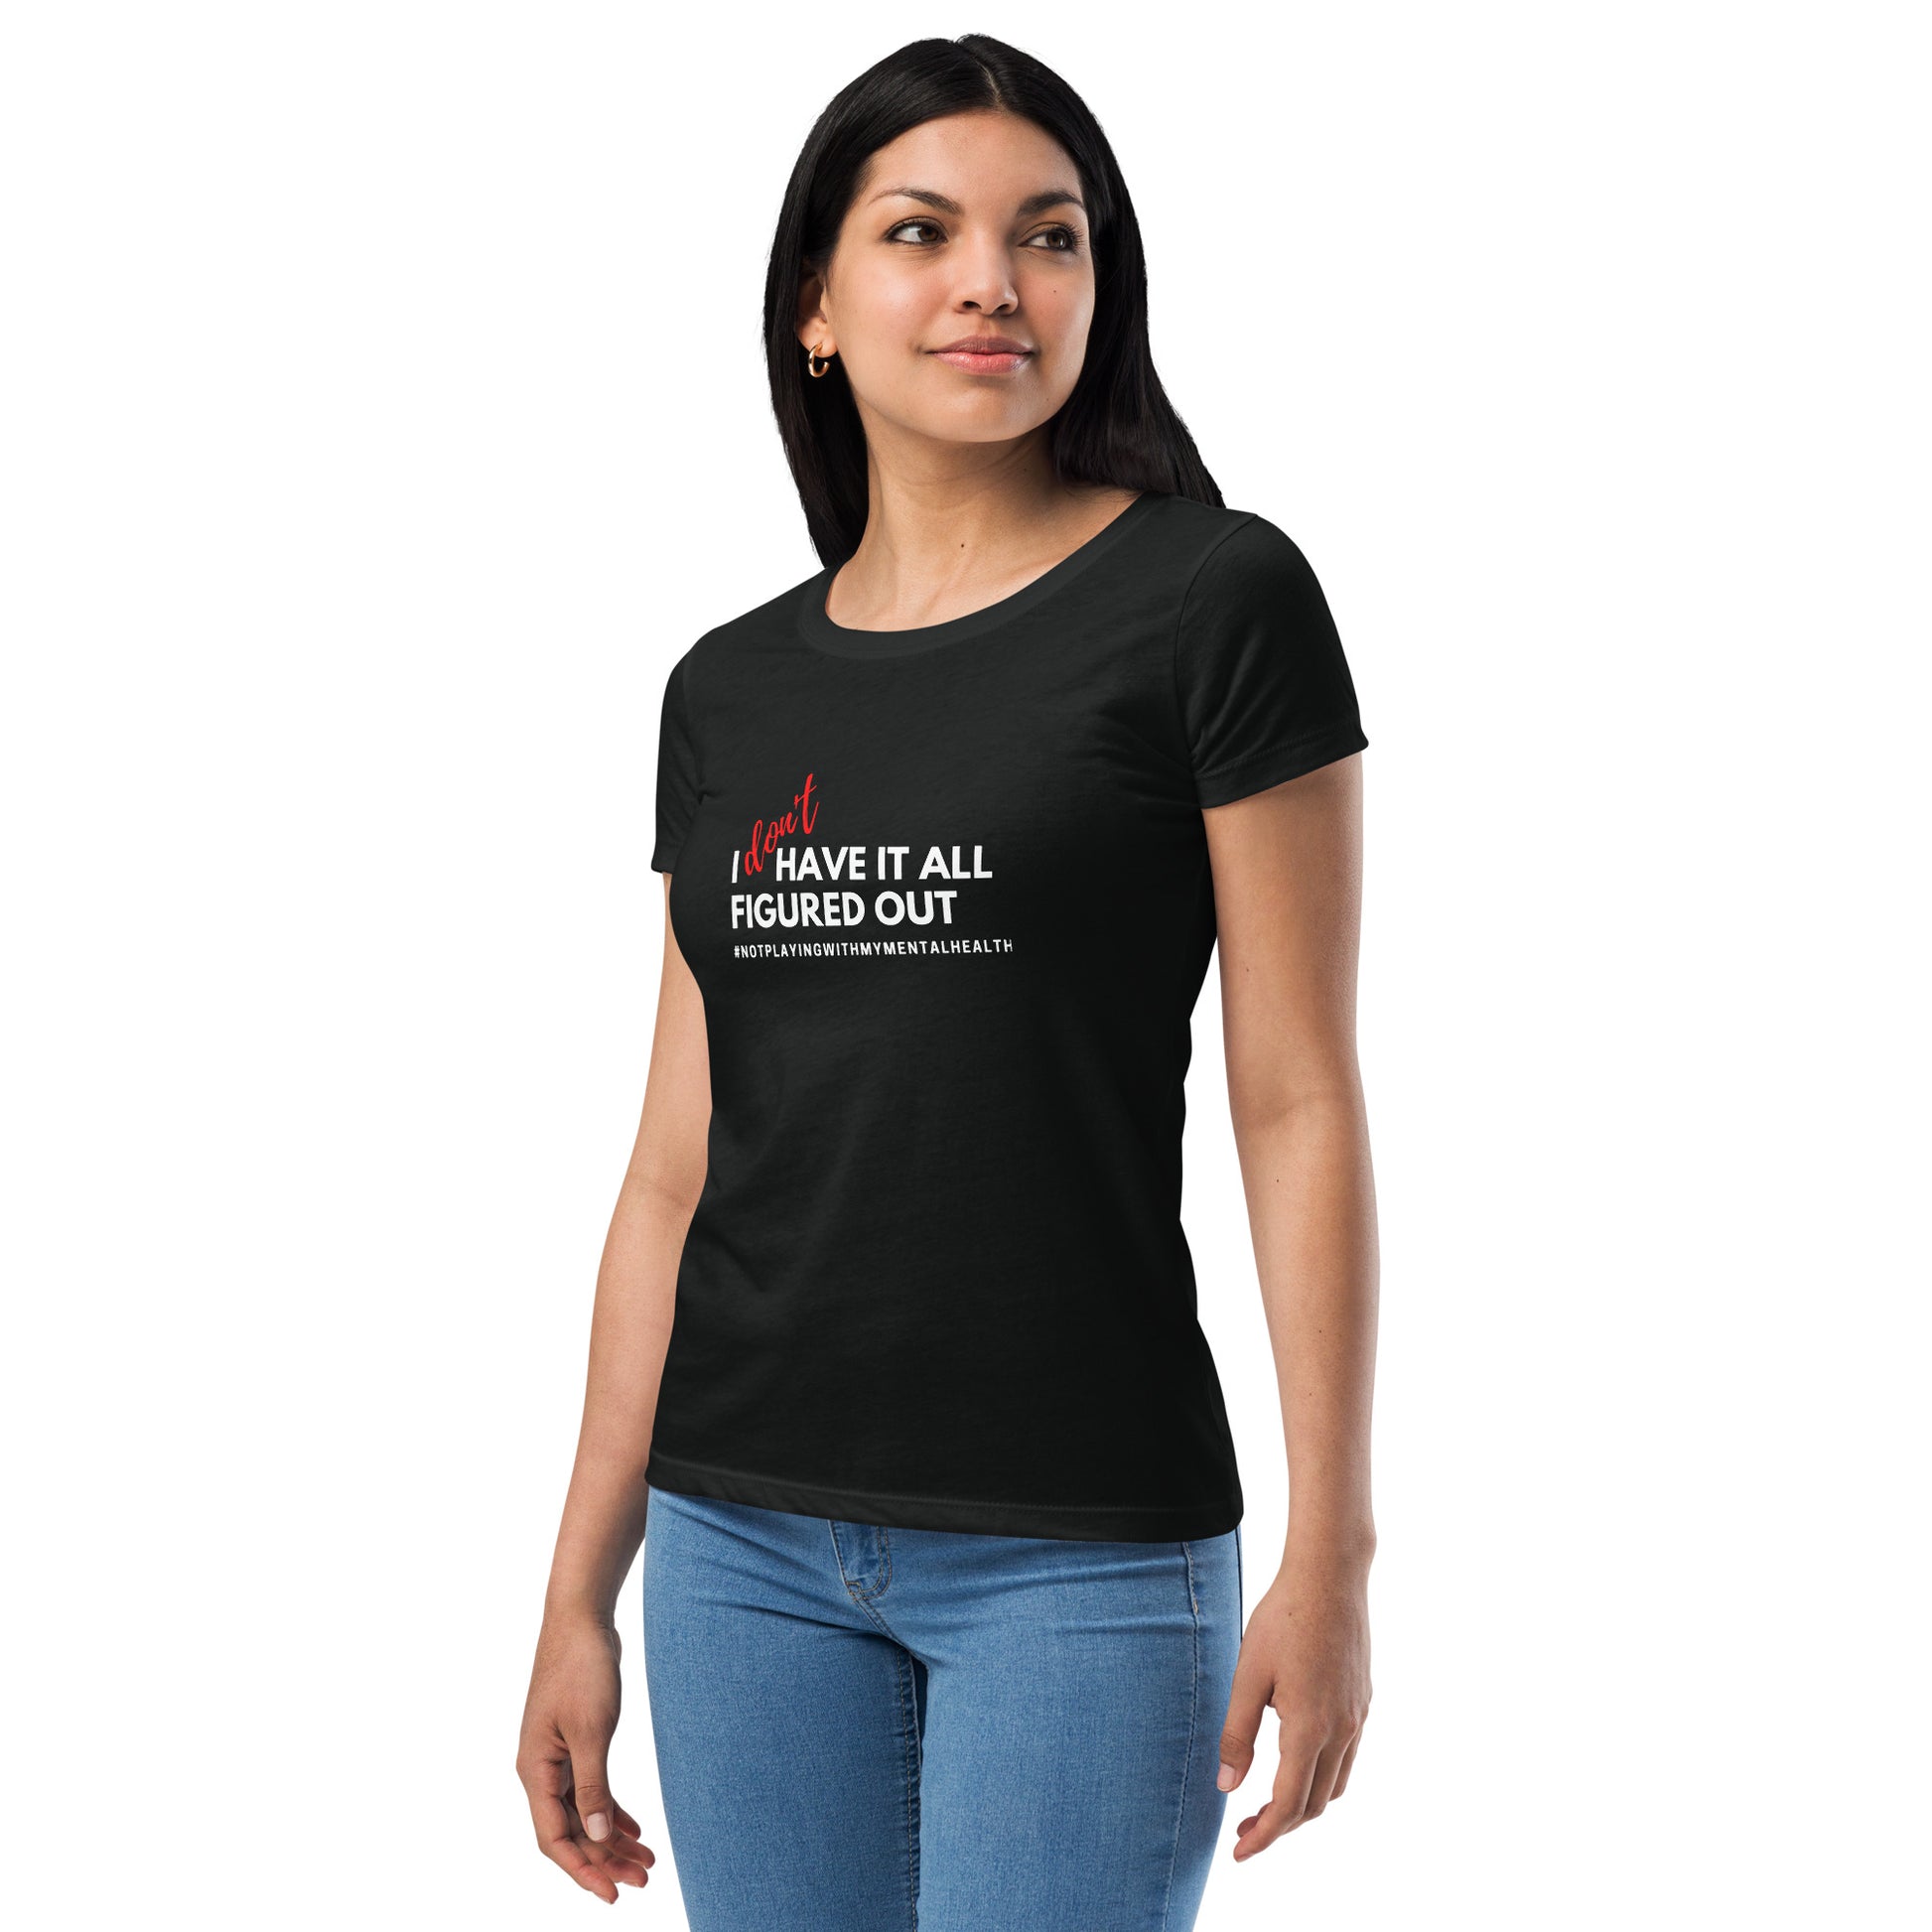 I Don't Have It Women's T-Shirt